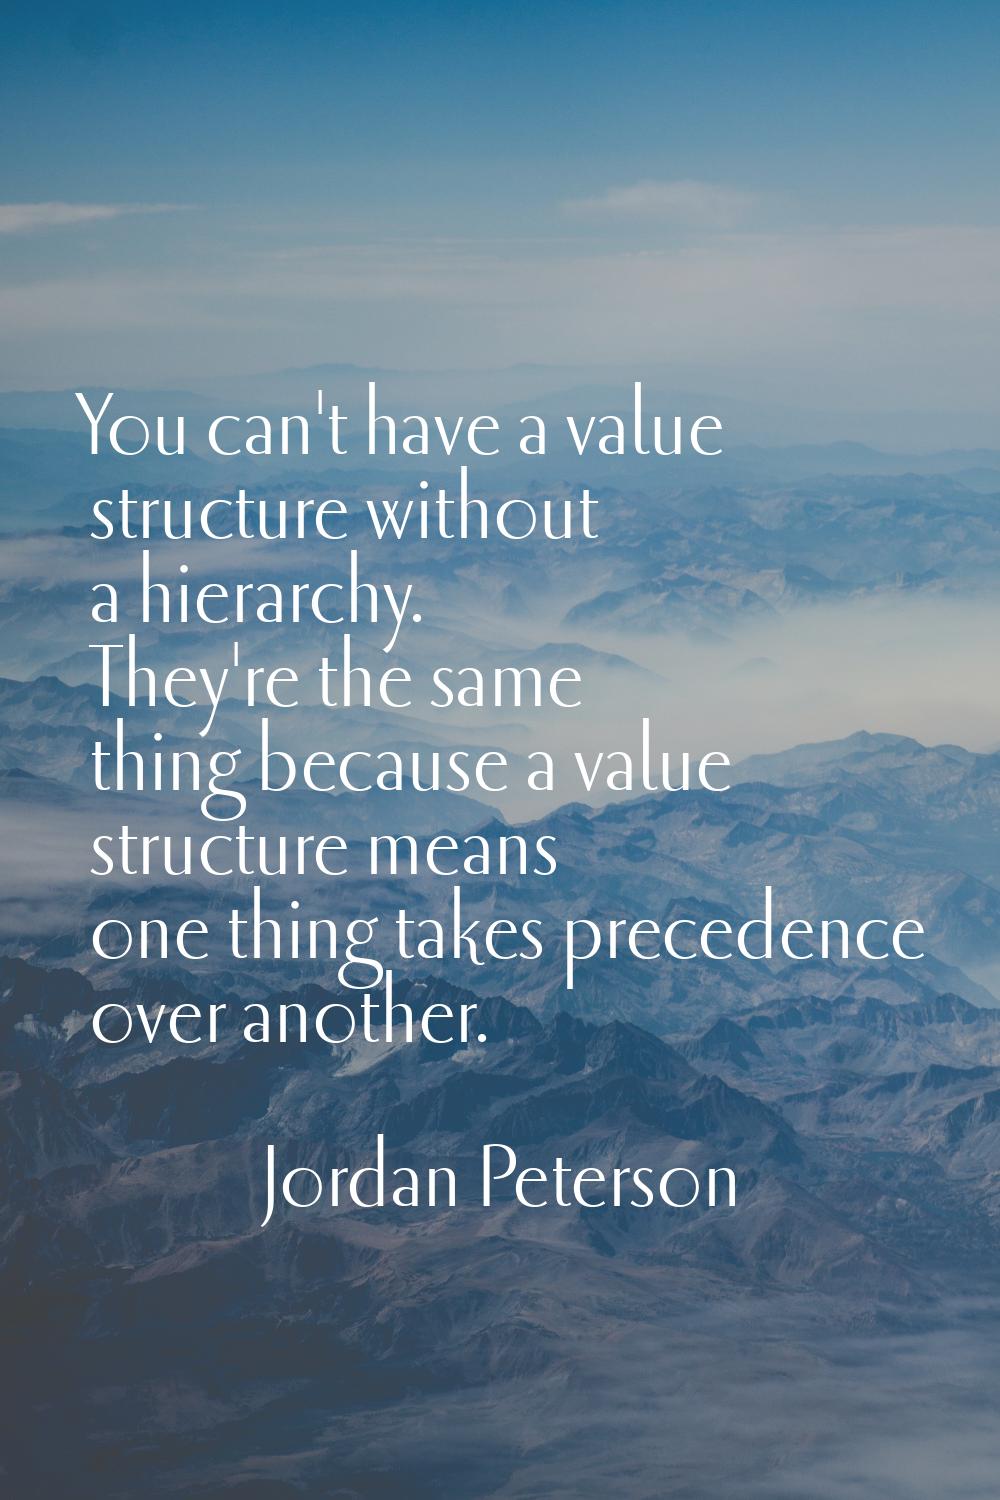 You can't have a value structure without a hierarchy. They're the same thing because a value struct